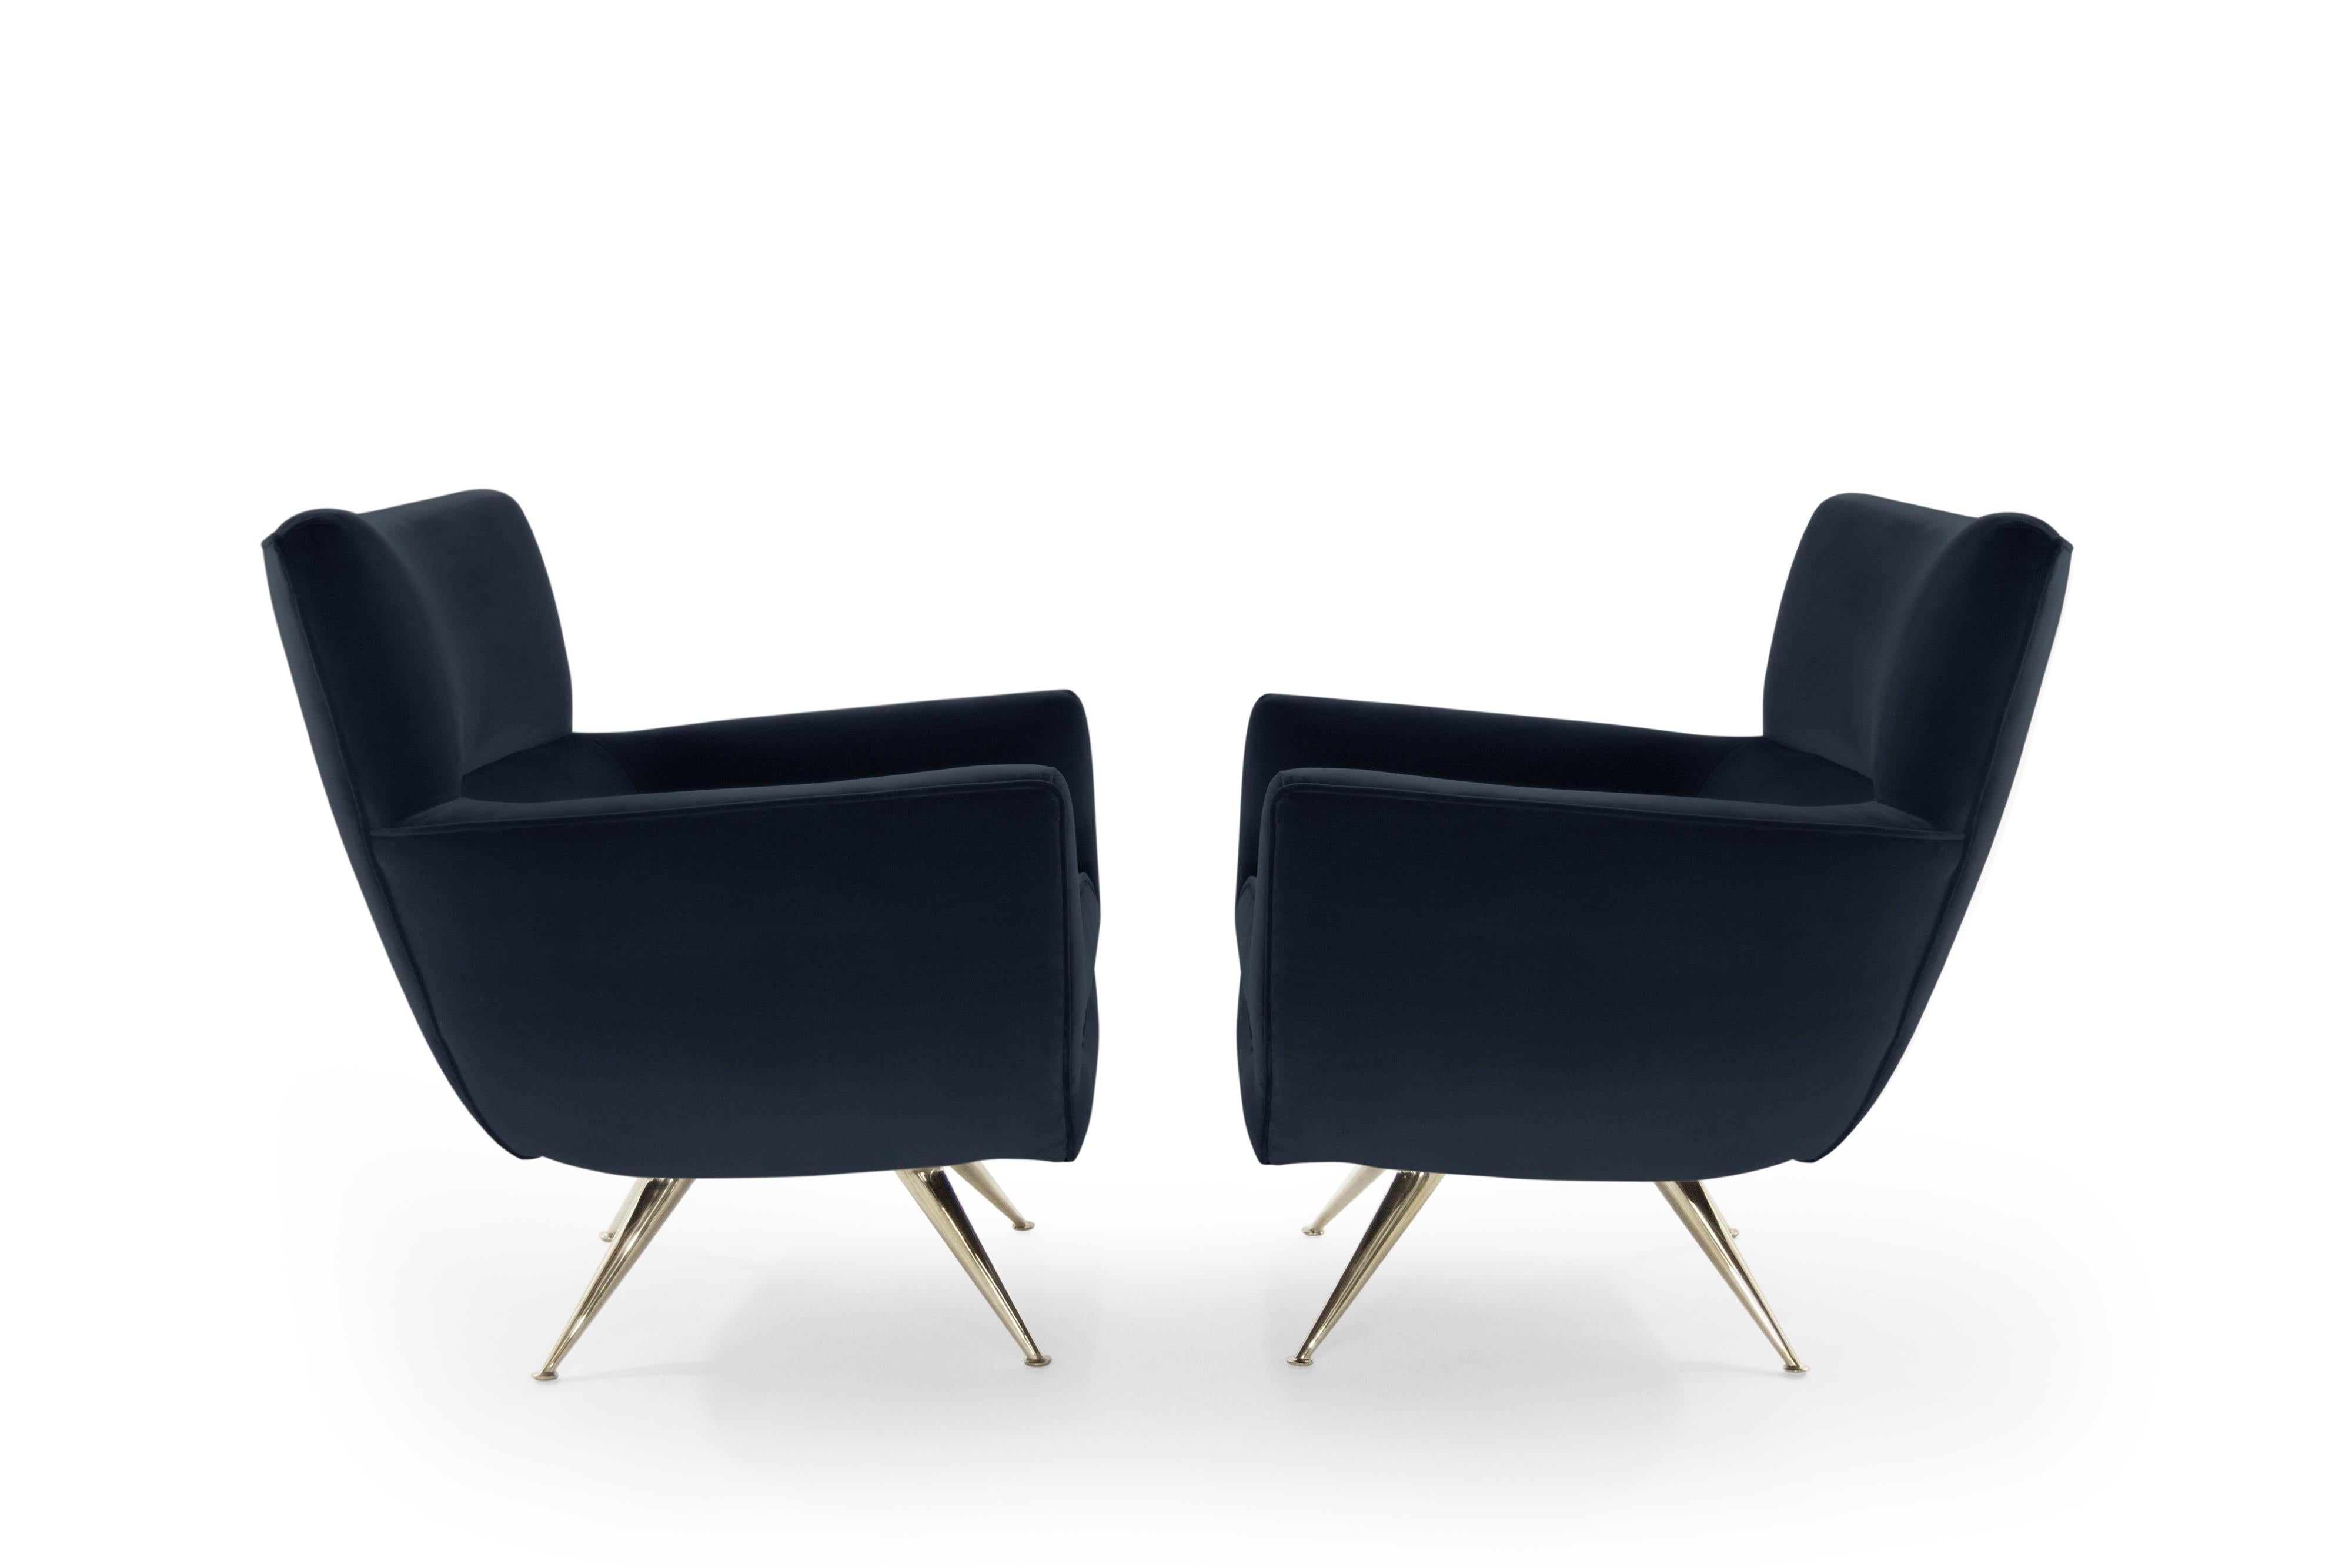 Incredibly rare pair of swivel chairs on brass legs designed by Henry Glass, circa 1950s. Newly upholstered in Great Plains cotton velvet (Midnight) by Holly Hunt. Newly brass-plated legs. Fabric samples available upon request.